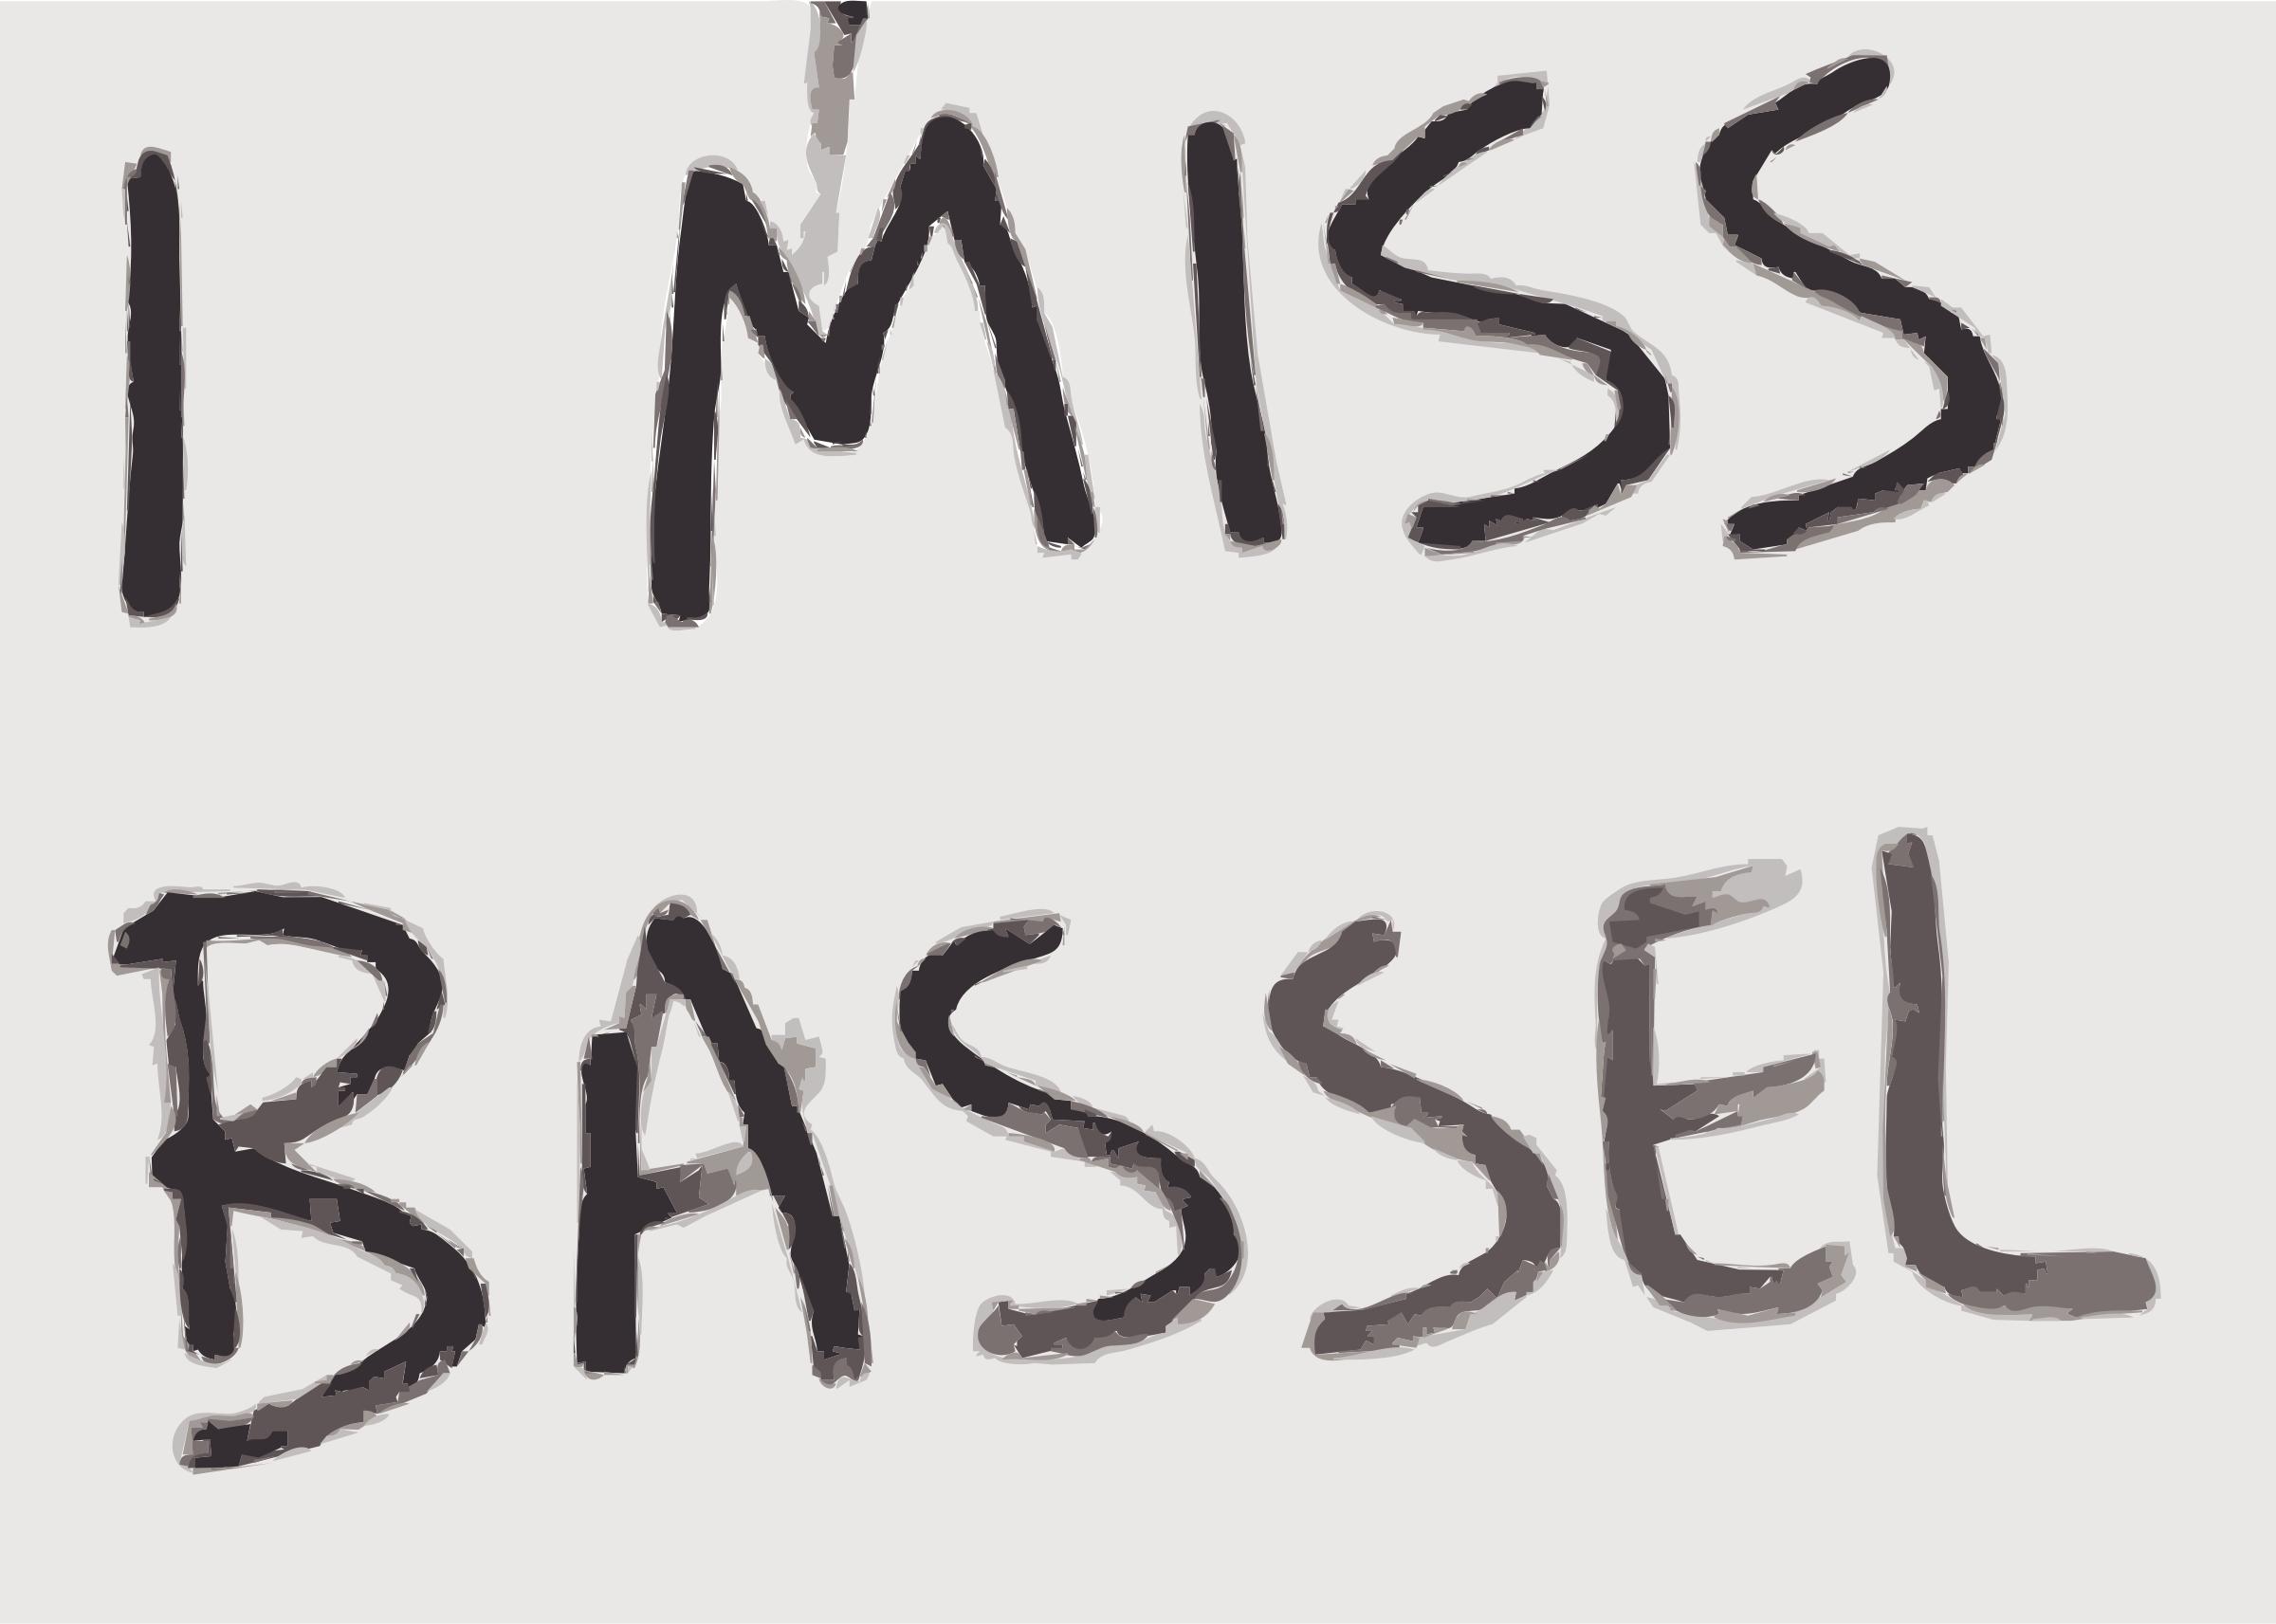 Personal Letters to Bassel png